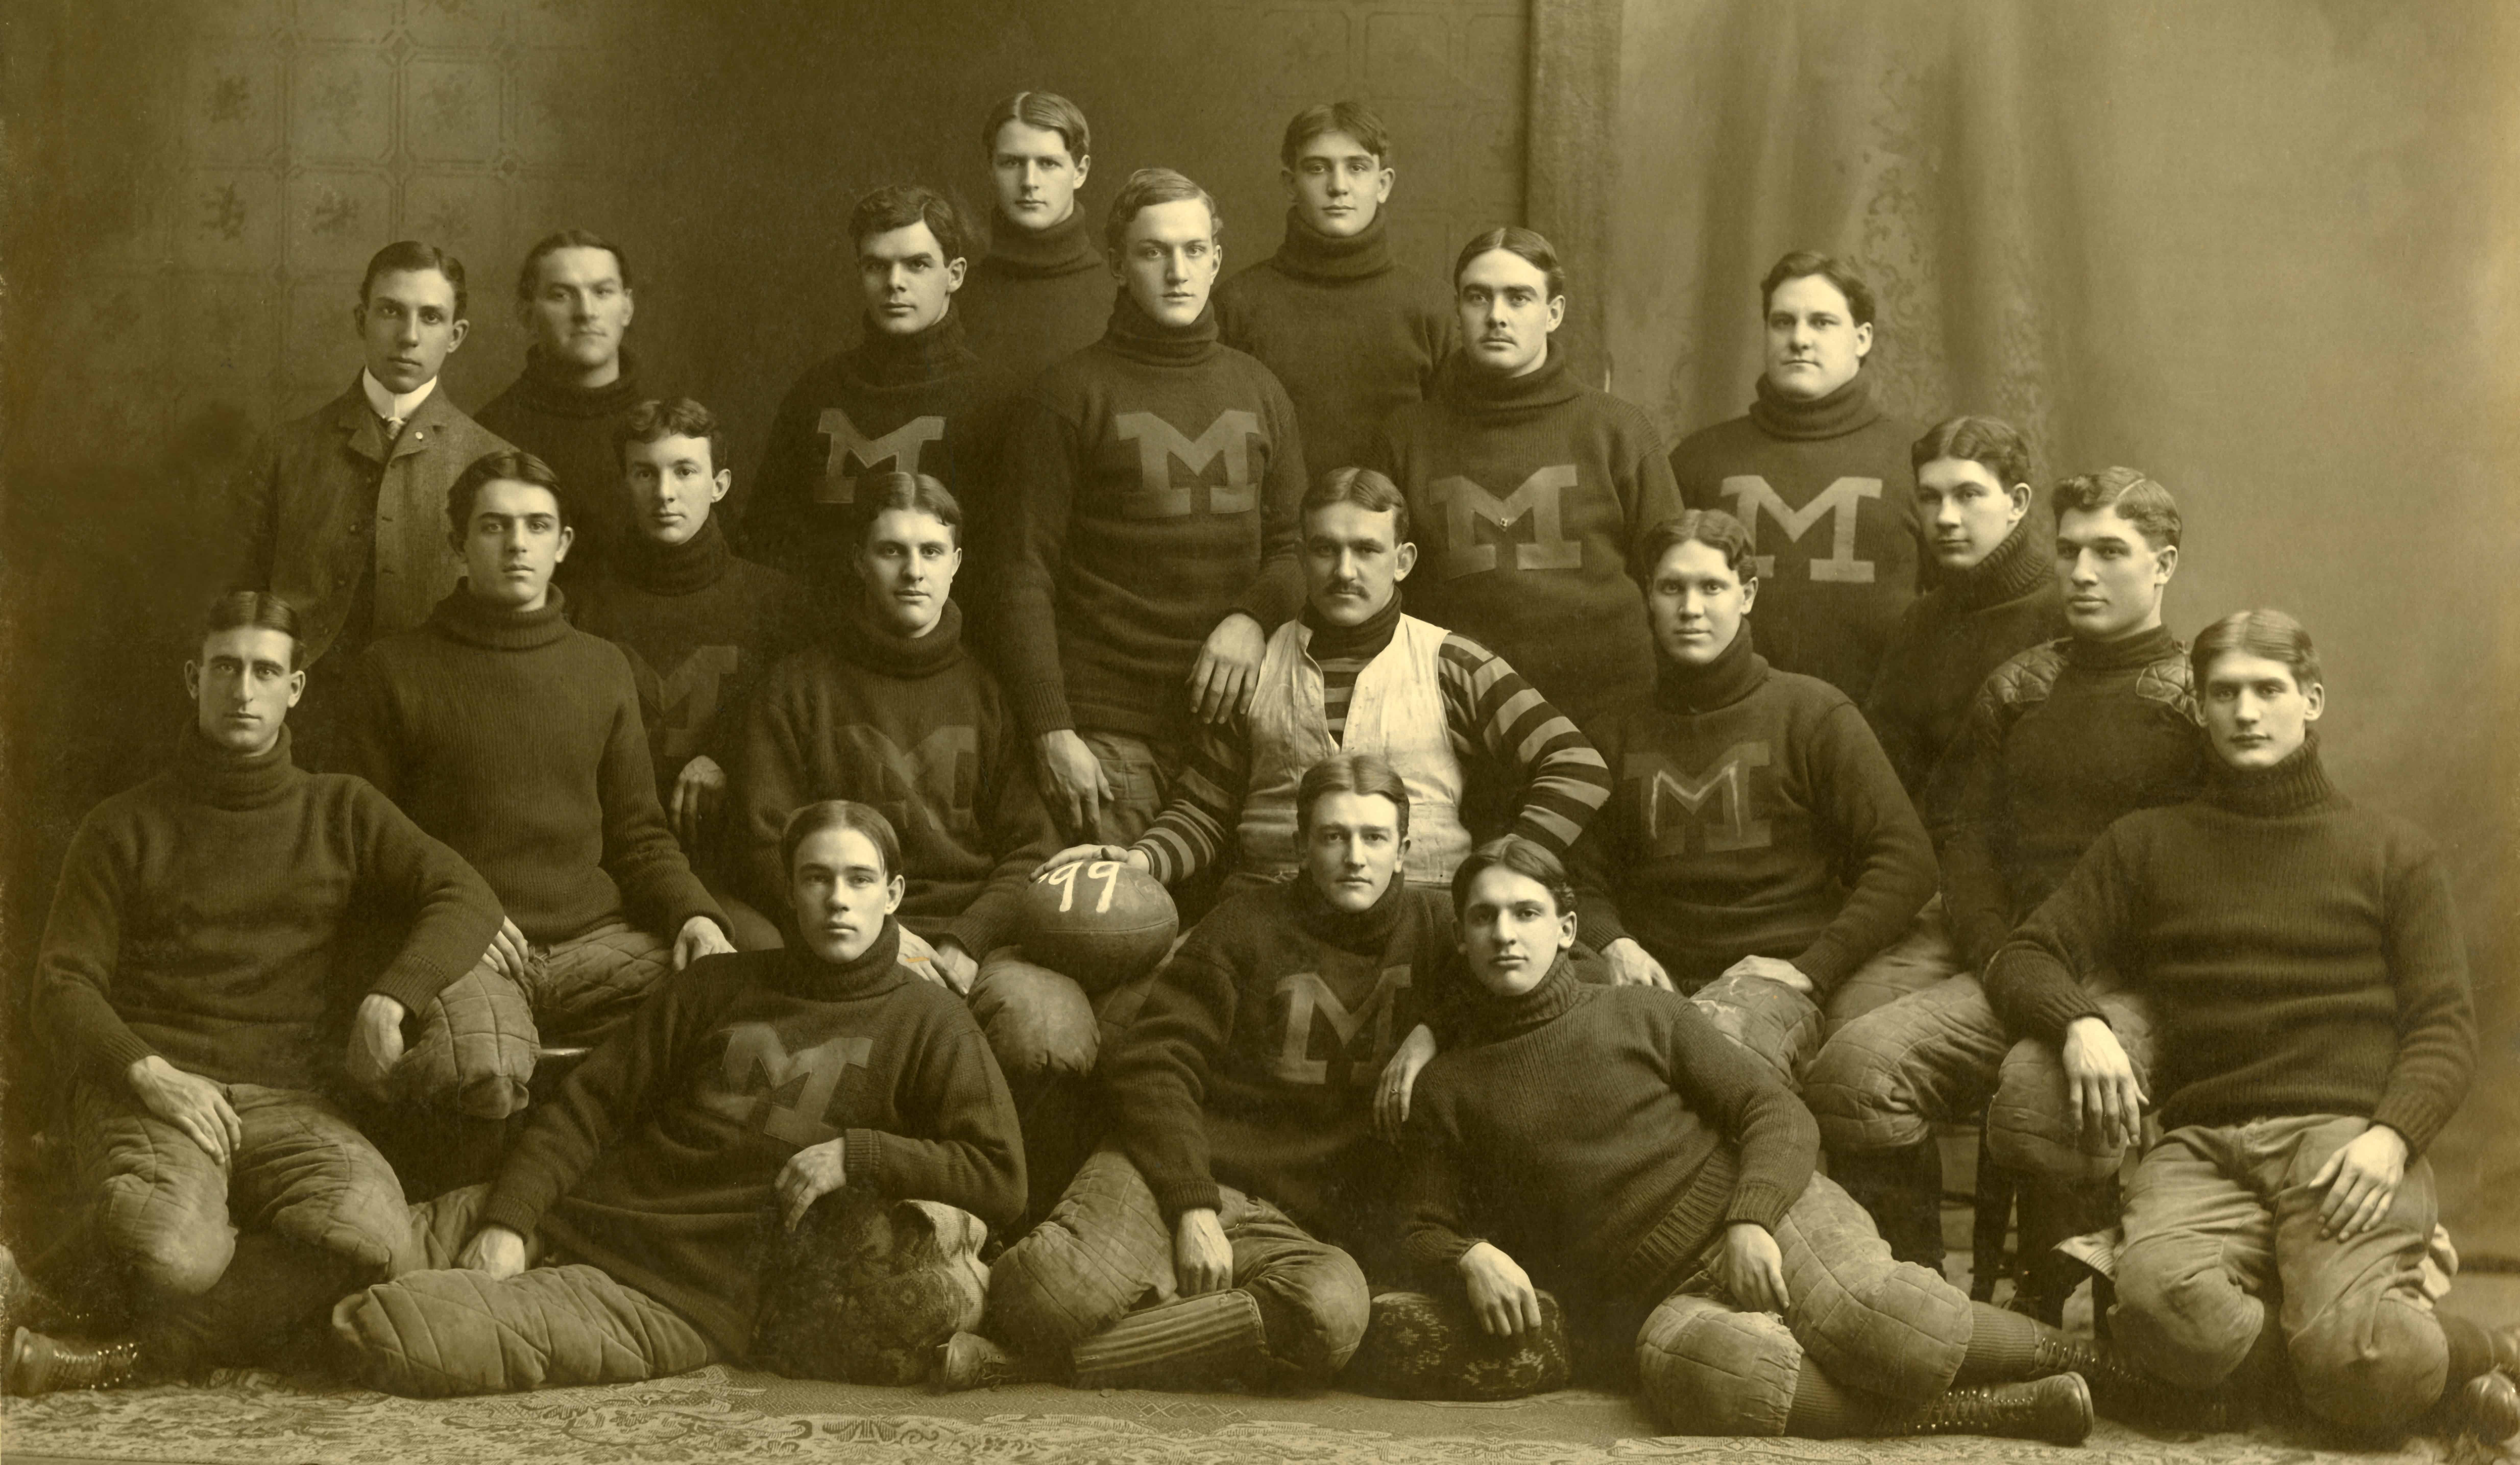 When Emma Morano was born, this is what Michigan's football team looked like. Image via Wiki Commons.